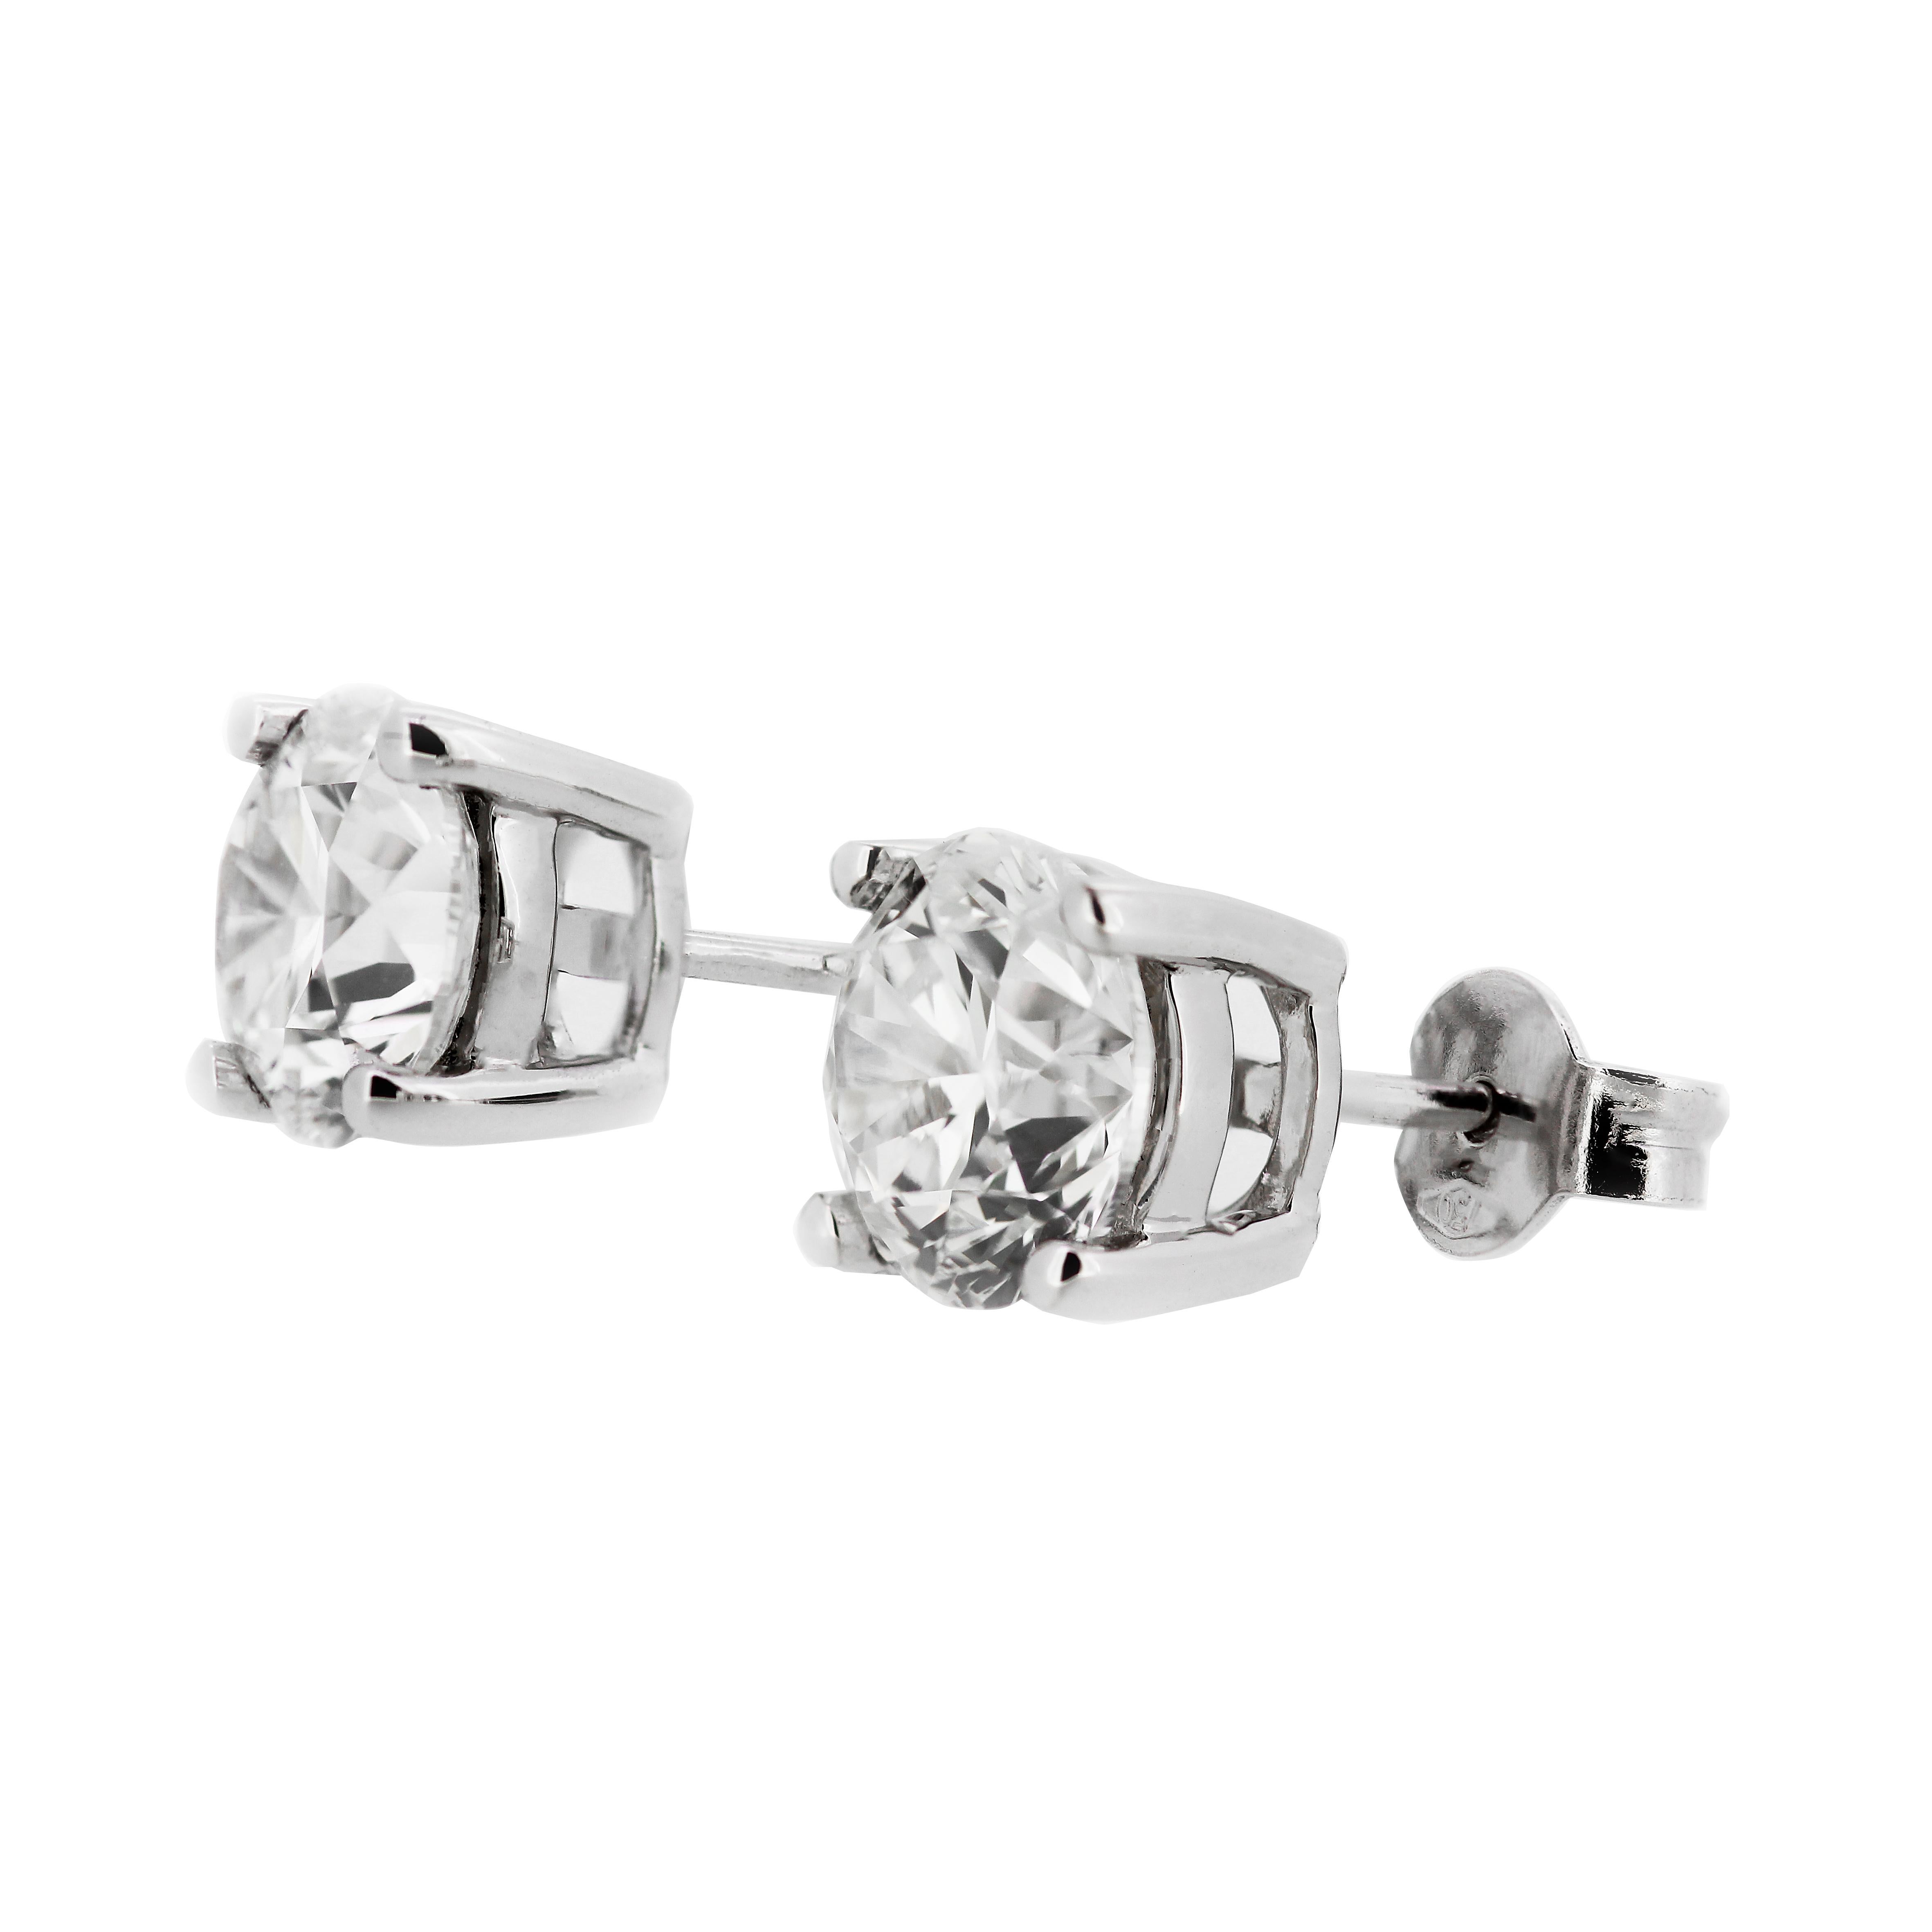 A sparkling pair of solitaire diamond stud earrings meticulously matched for size, colour and clarity. Elevate your ears to a new level of elegance with these exceptional GIA-certified diamond ear studs, each featuring 2 GIA-graded round brilliant